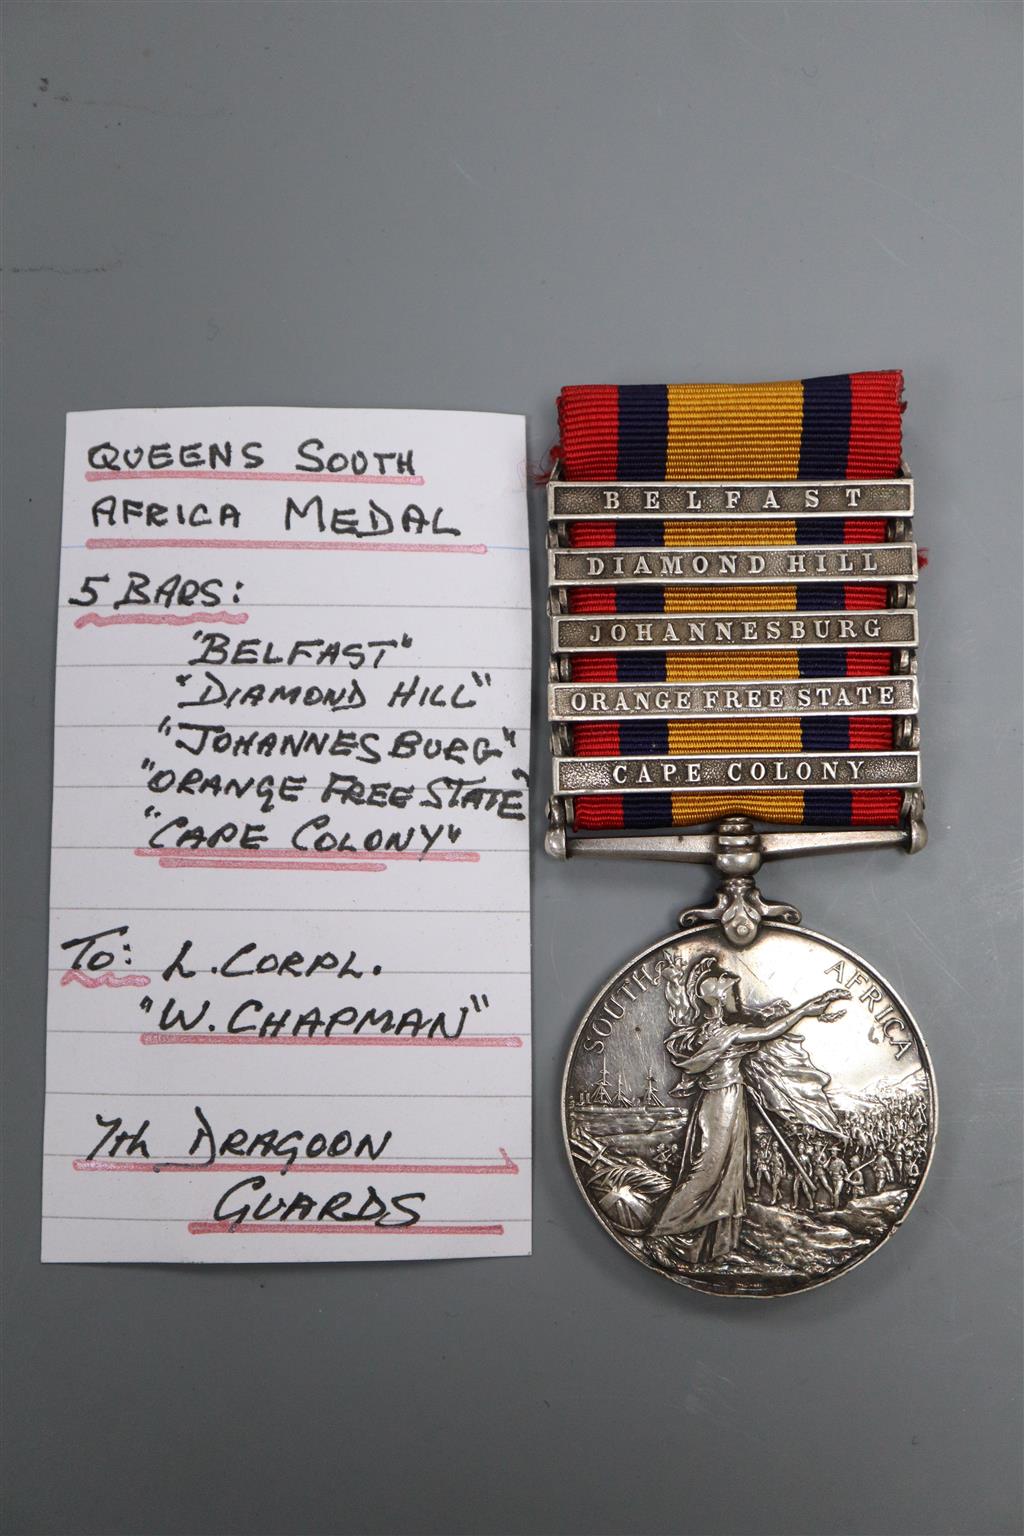 A Queens South Africa medal with 5 clasps to L.Corpl. W.Chapman 7th Dragoon Guards